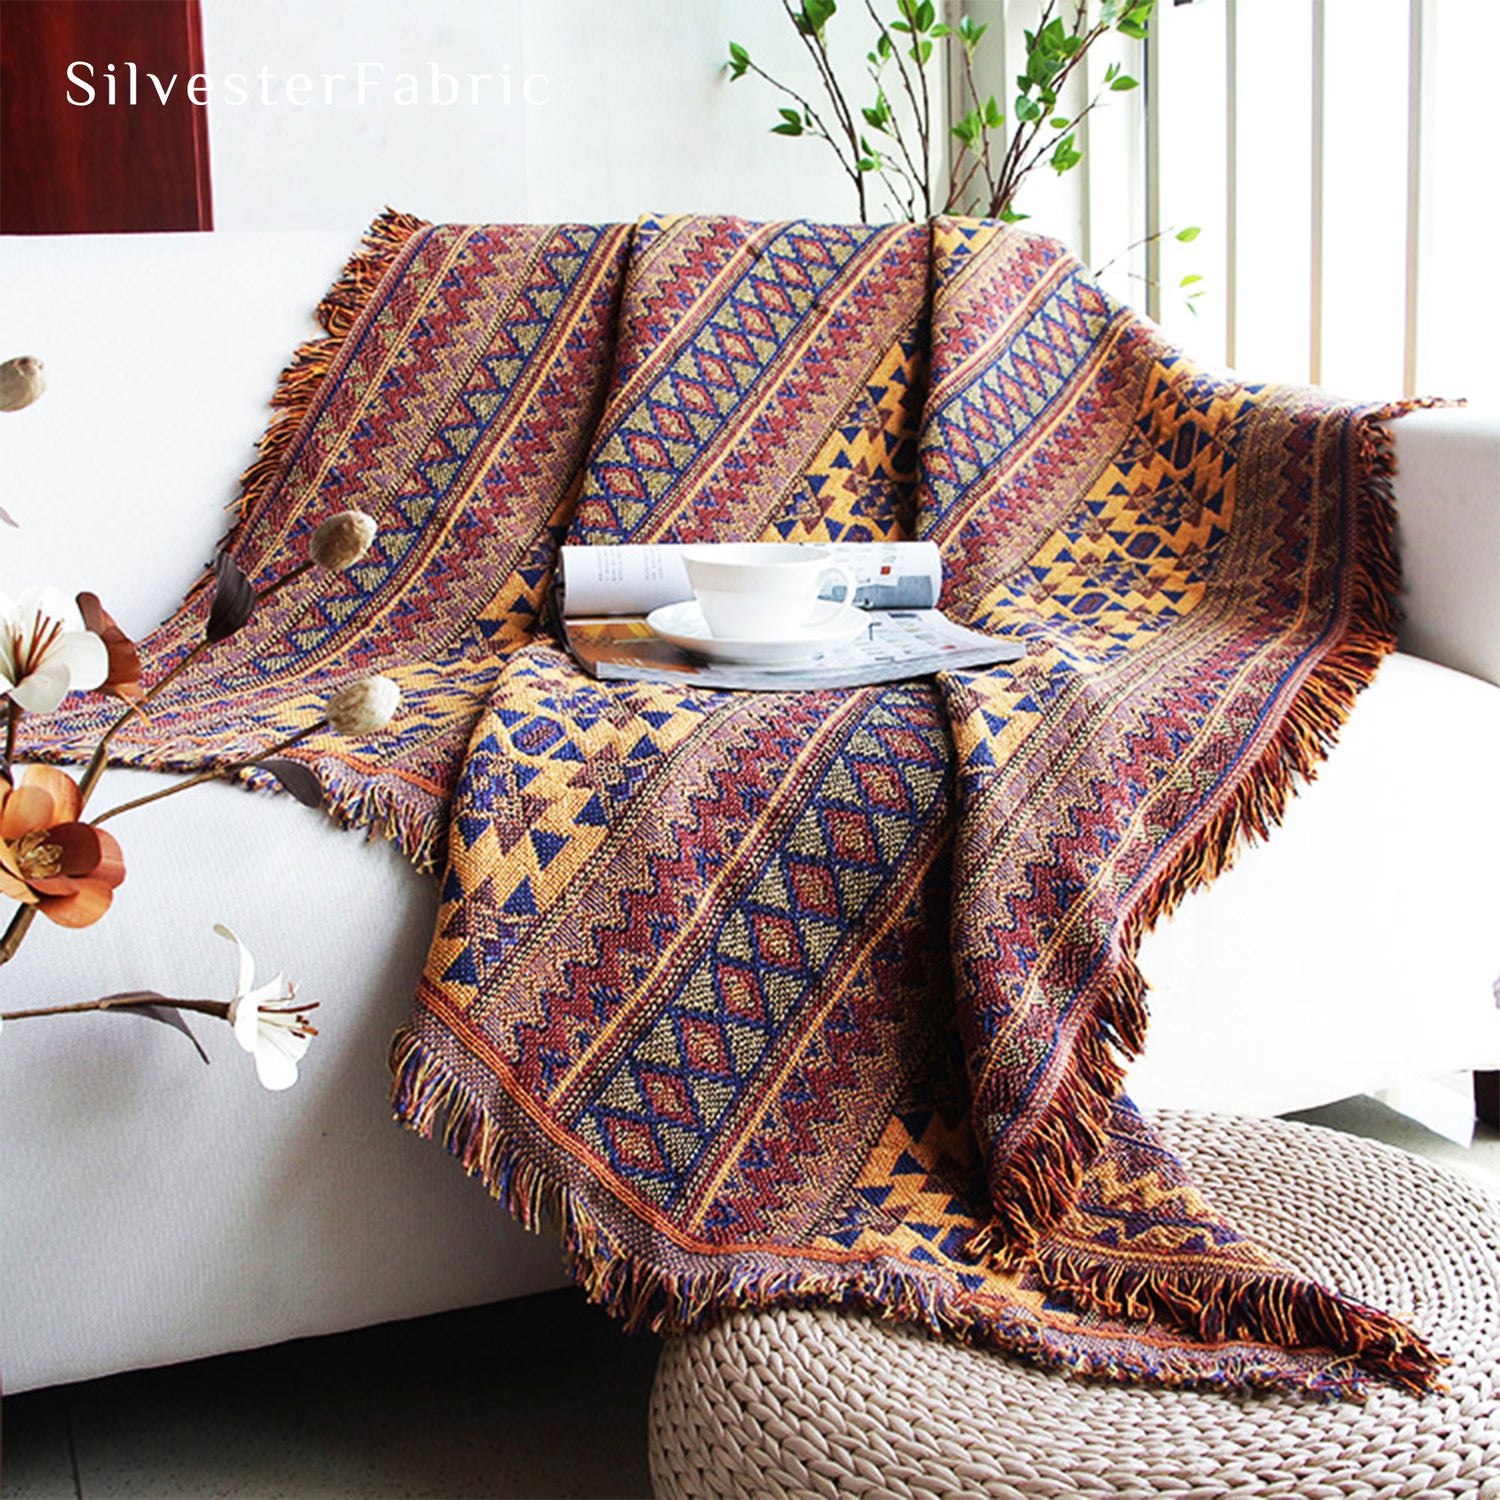 Buy Premium Blanket Online at Best Prices - Silvester Fabric